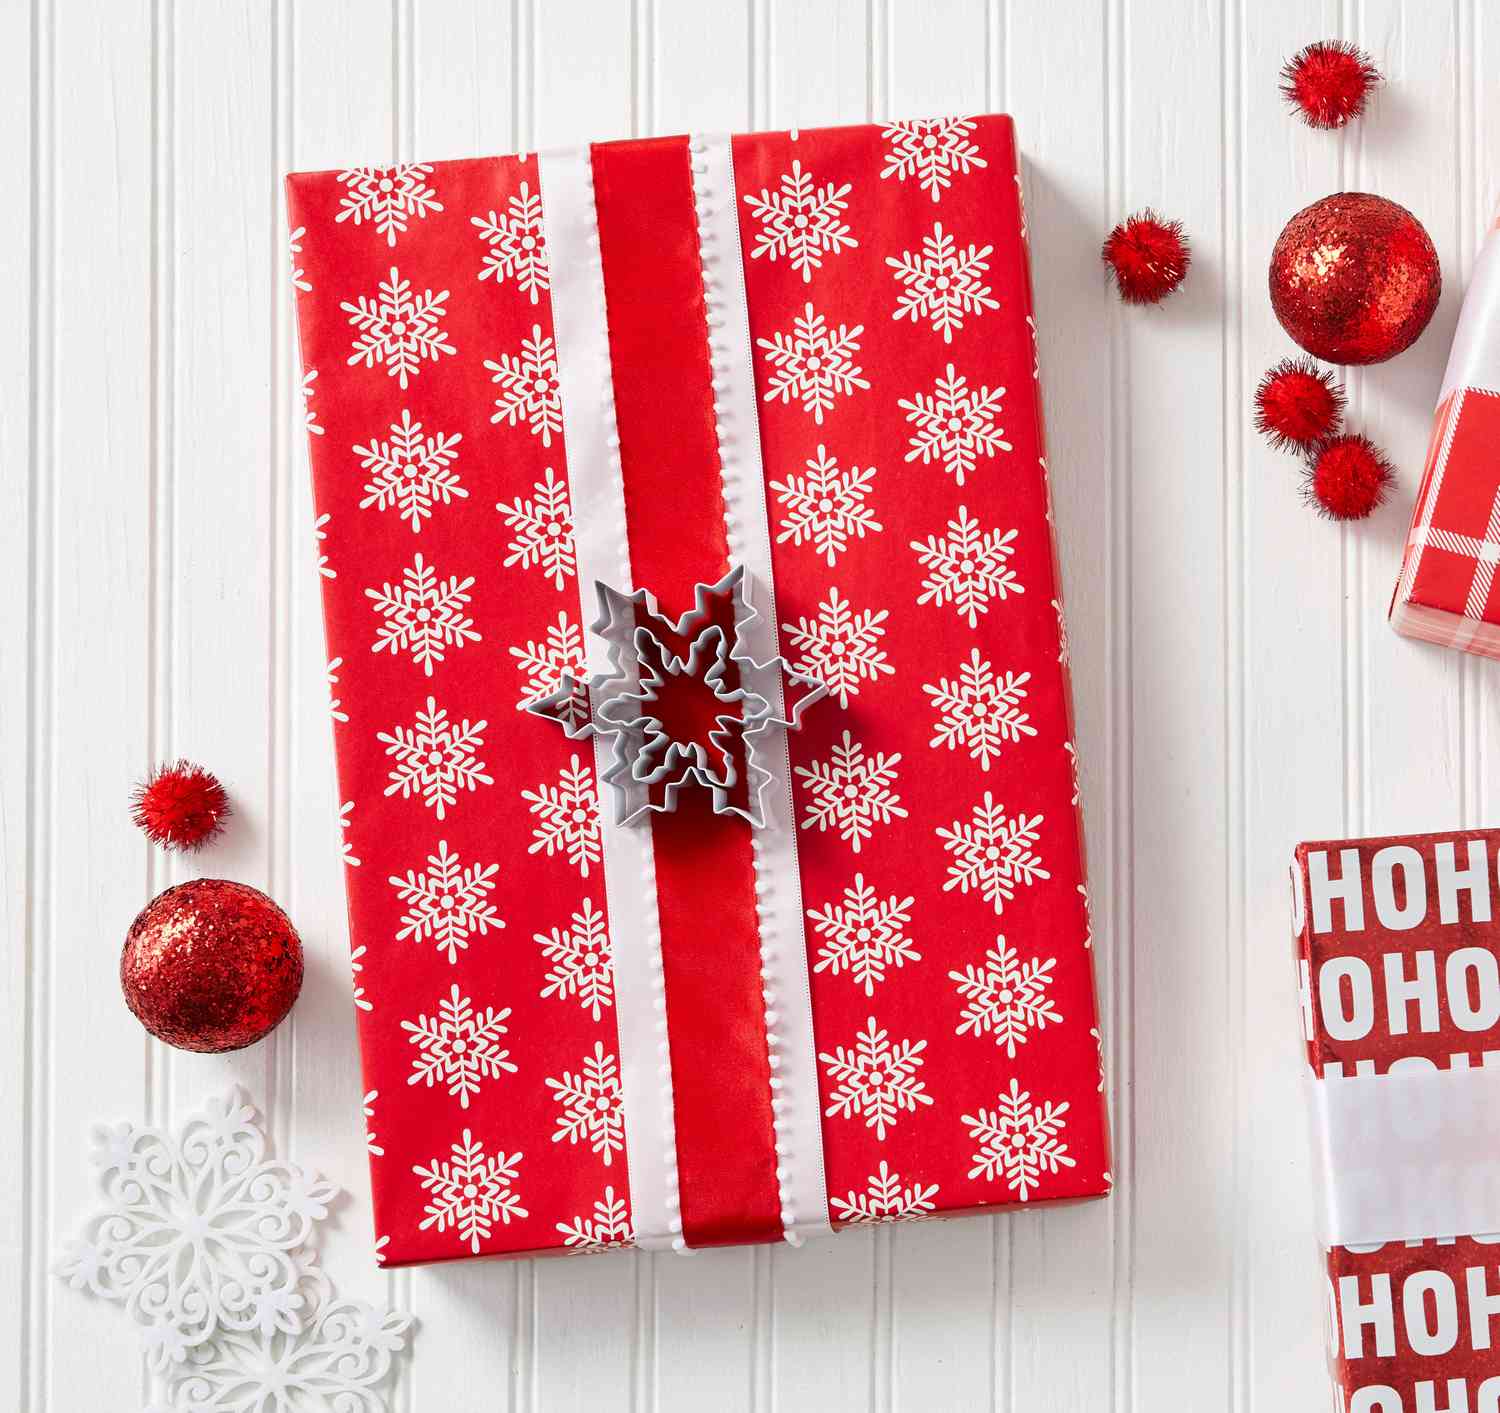 gift box wrapped in red and white snowflake wrapping paper, next to white snowflake ornaments and red sparkly ball ornaments